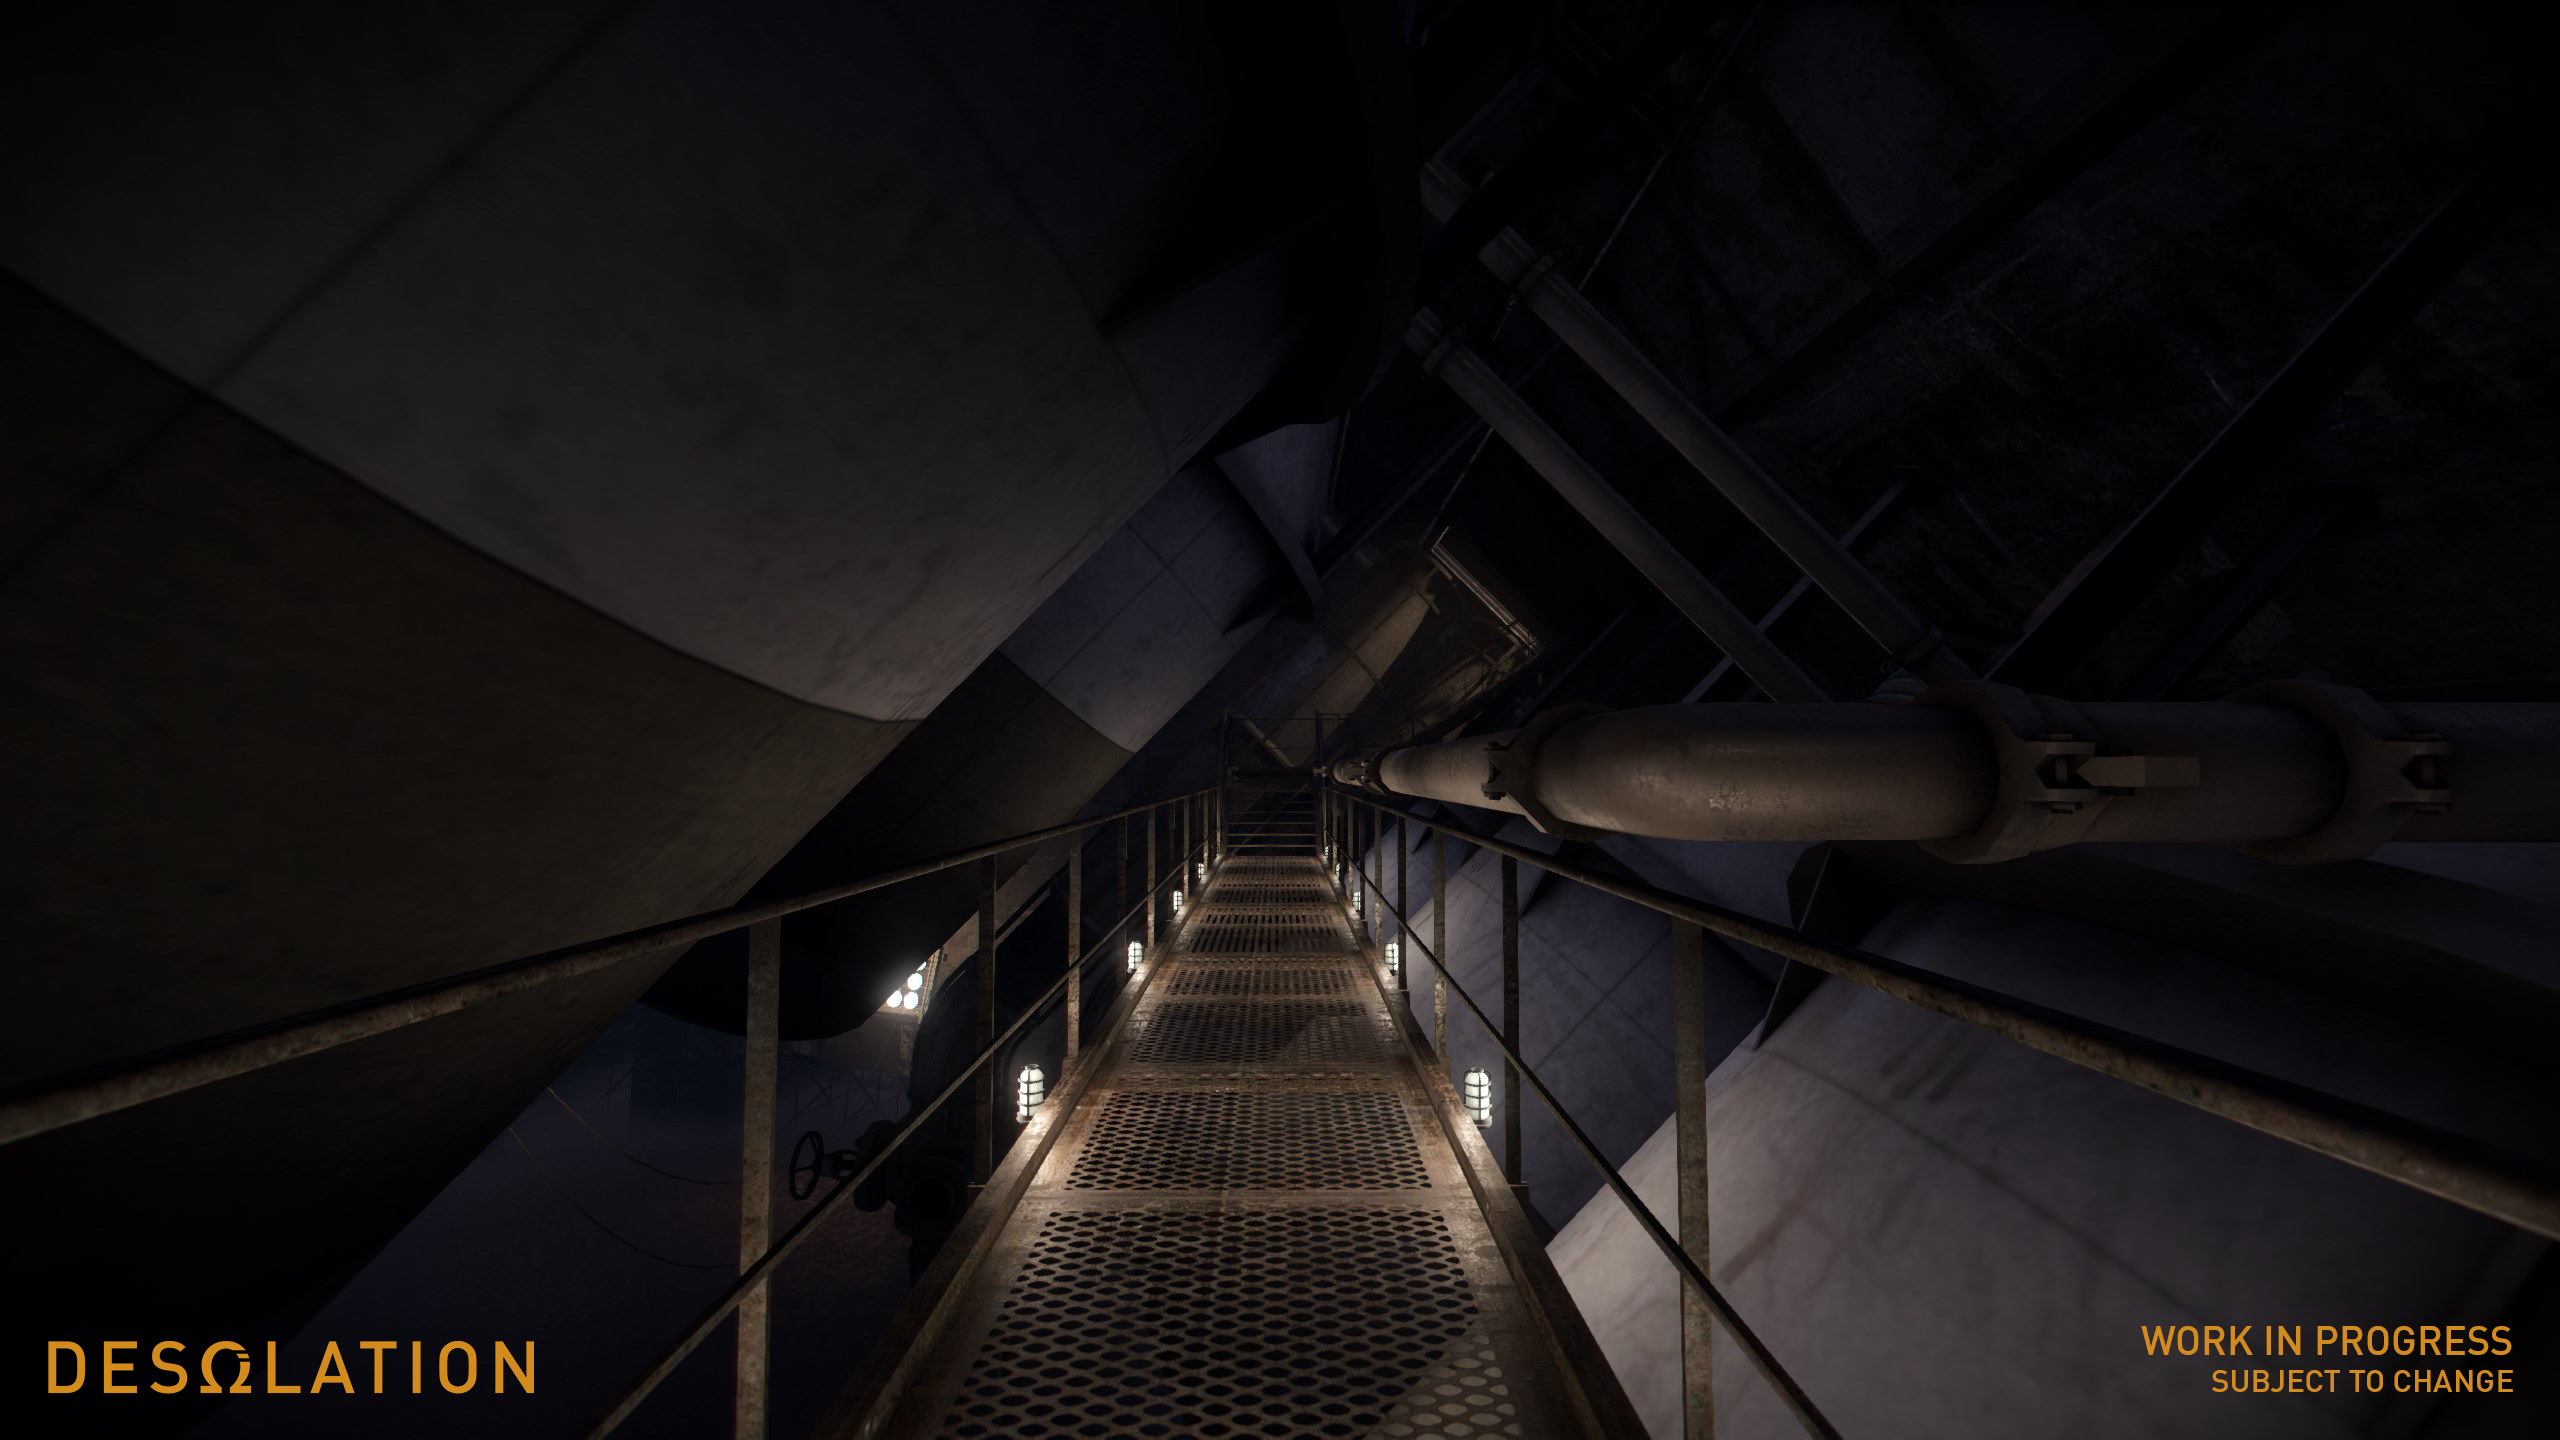 A view looking down a suspended catwalk in between large industrial storage tanks.